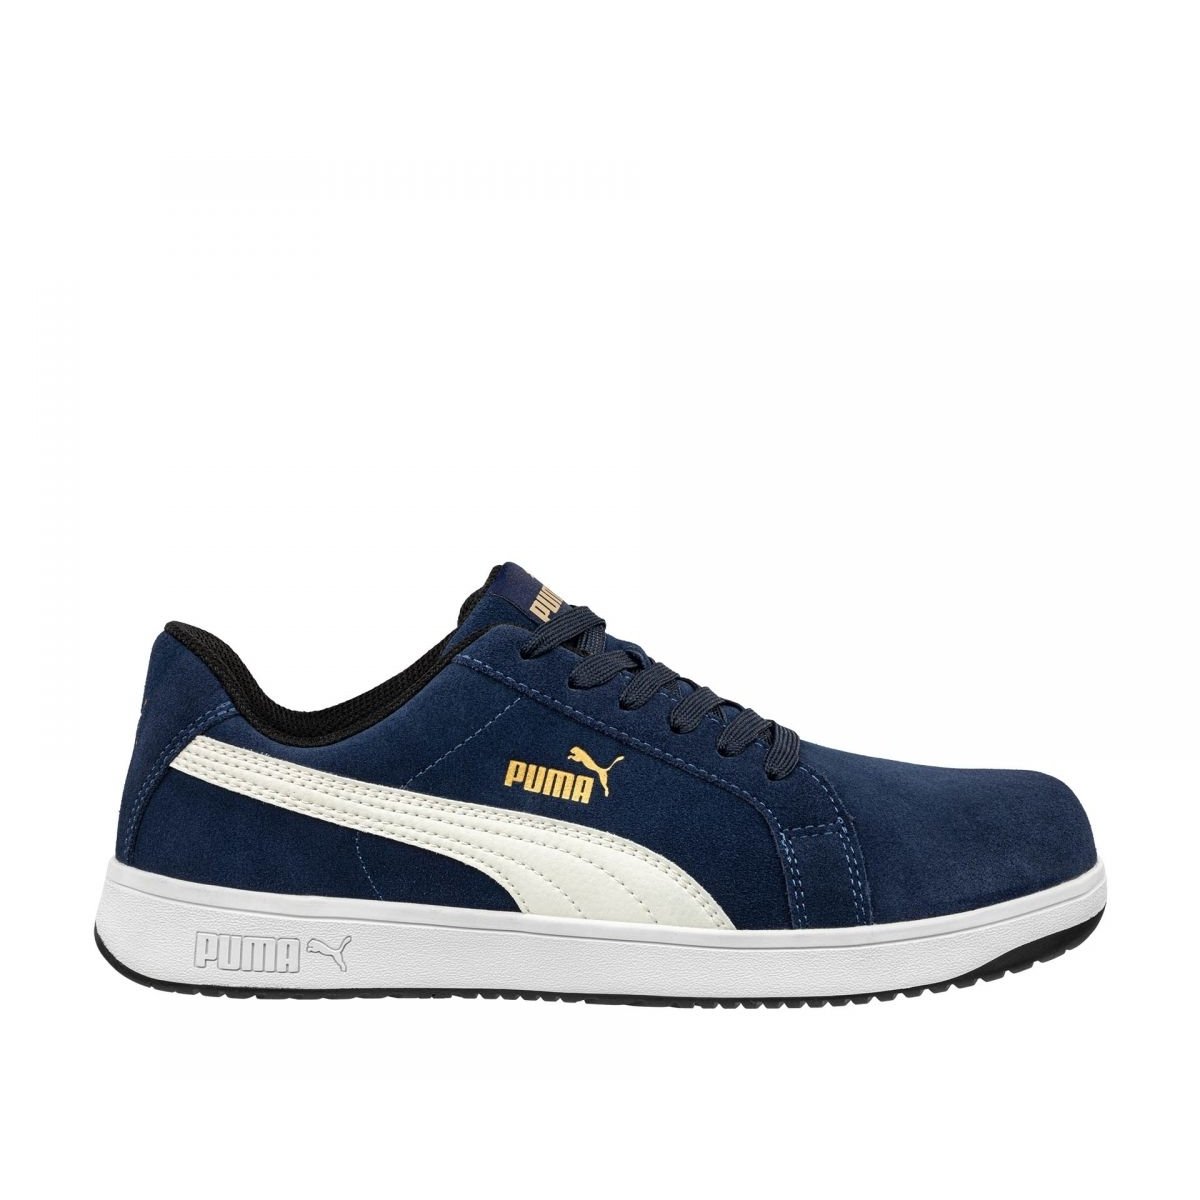 PUMA Safety Men's Iconic Low Composite Toe EH Work Shoes Navy Suede - 640025 ONE SIZE Navy - Navy, 13